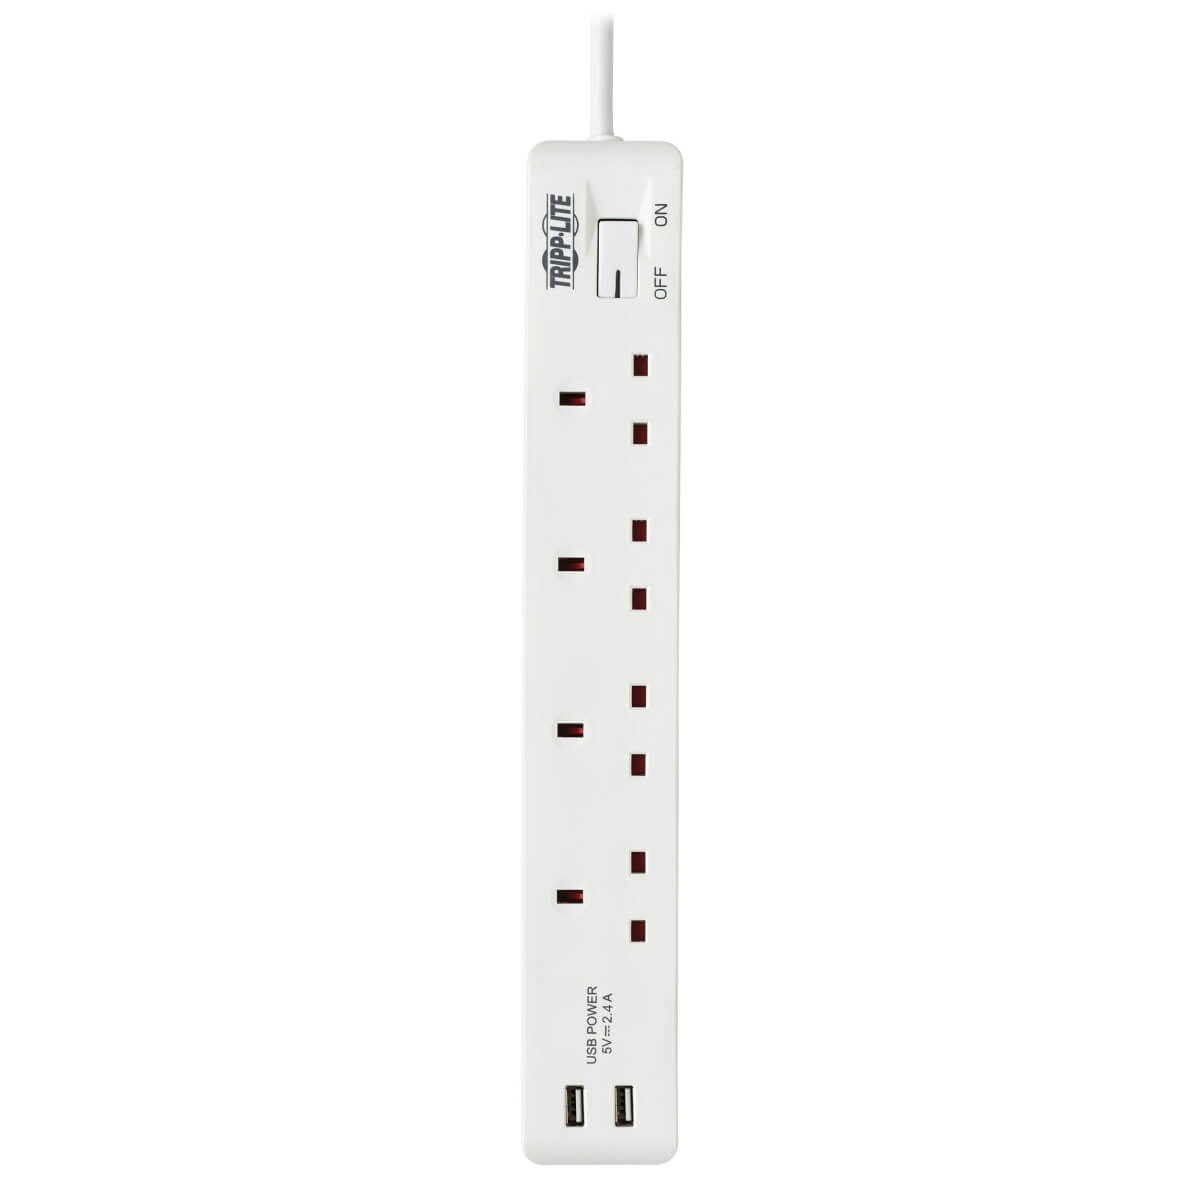 Power Strip 4Outlet Bs1363A Usb Charging